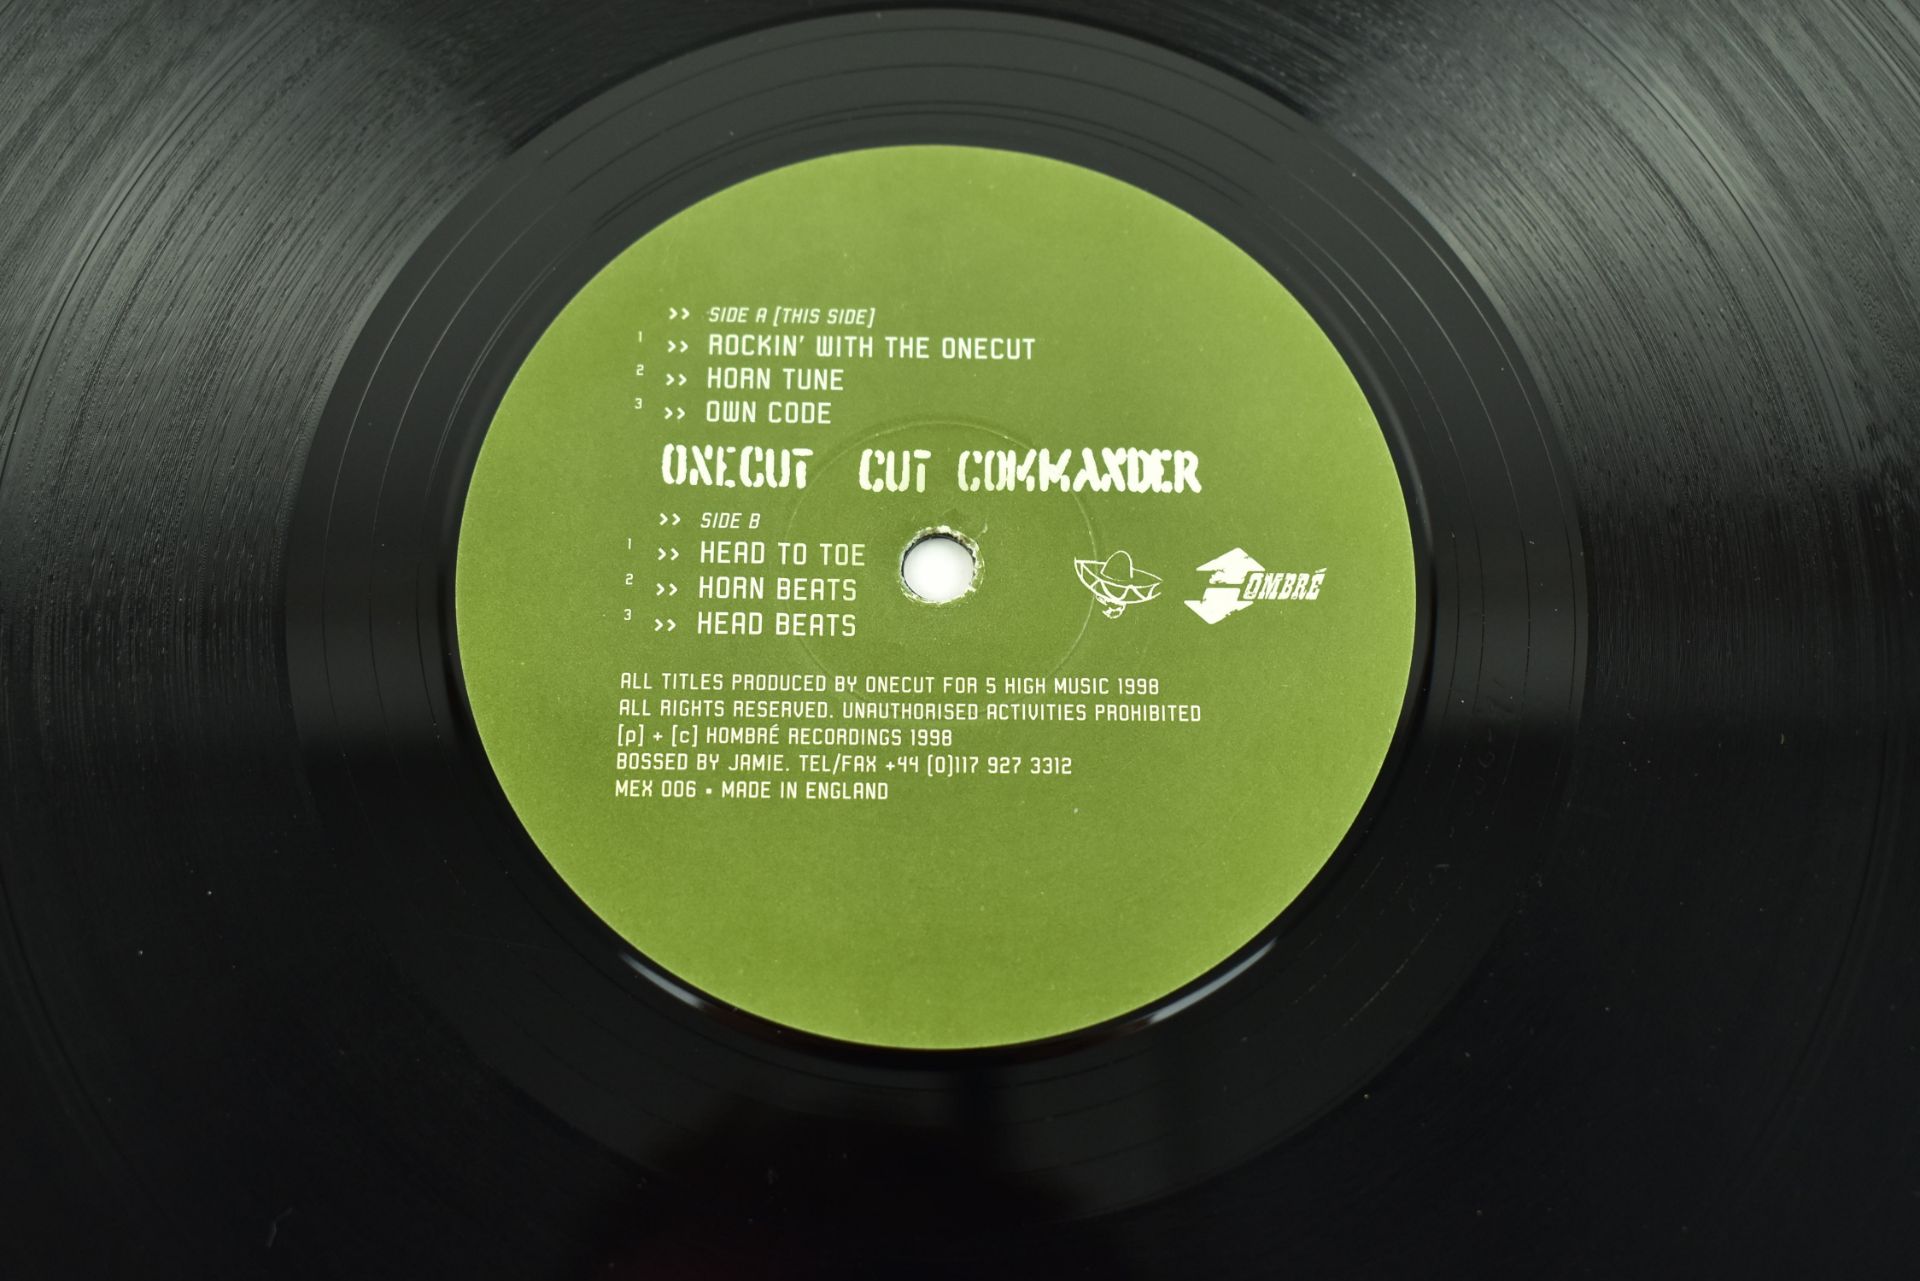 ONECUT - CUT COMMANDER, 1998 - BANKSY'S FIRST COVER ARTWORK - Image 3 of 4